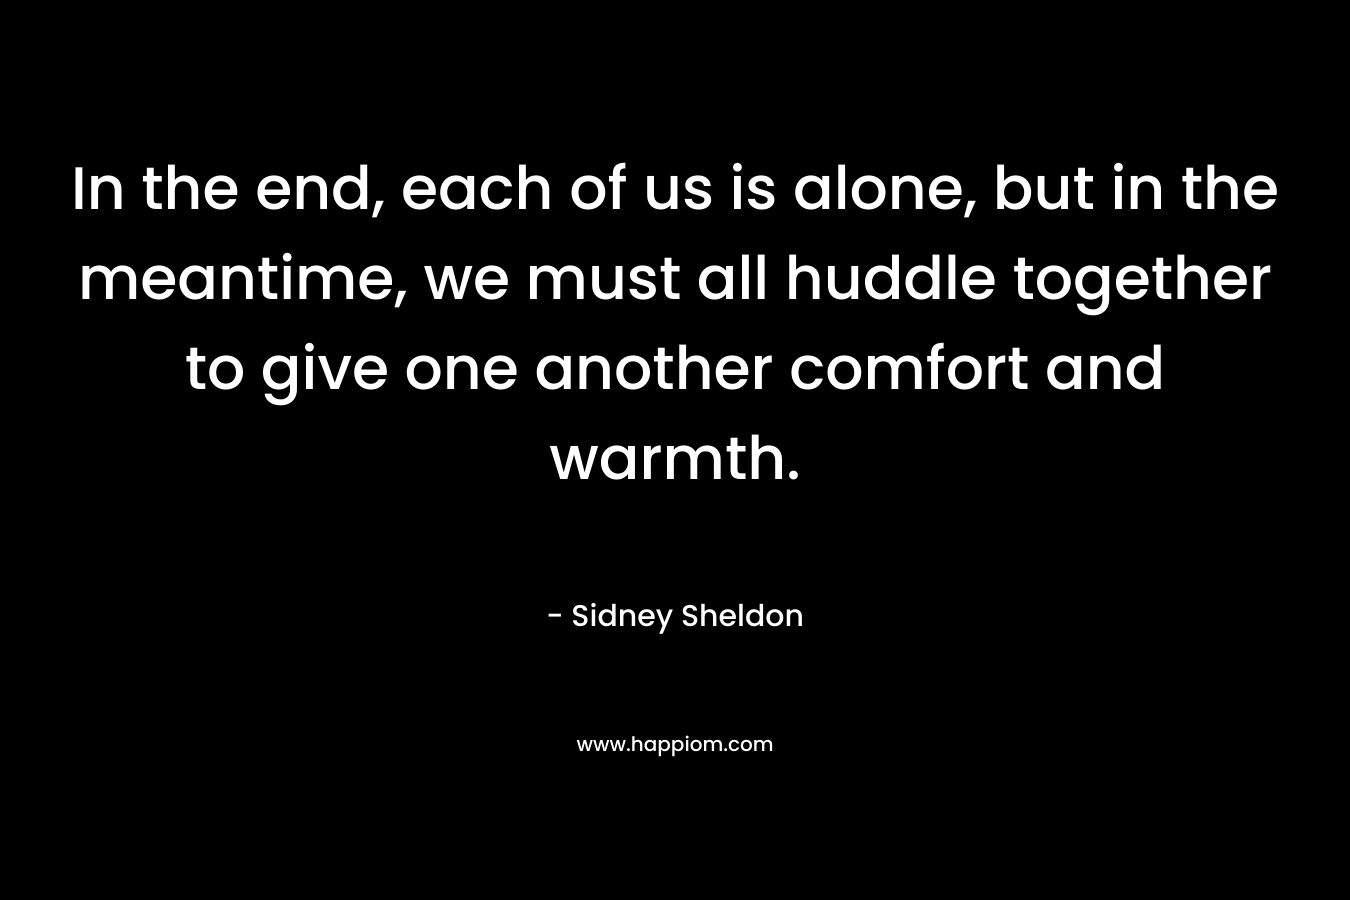 In the end, each of us is alone, but in the meantime, we must all huddle together to give one another comfort and warmth.